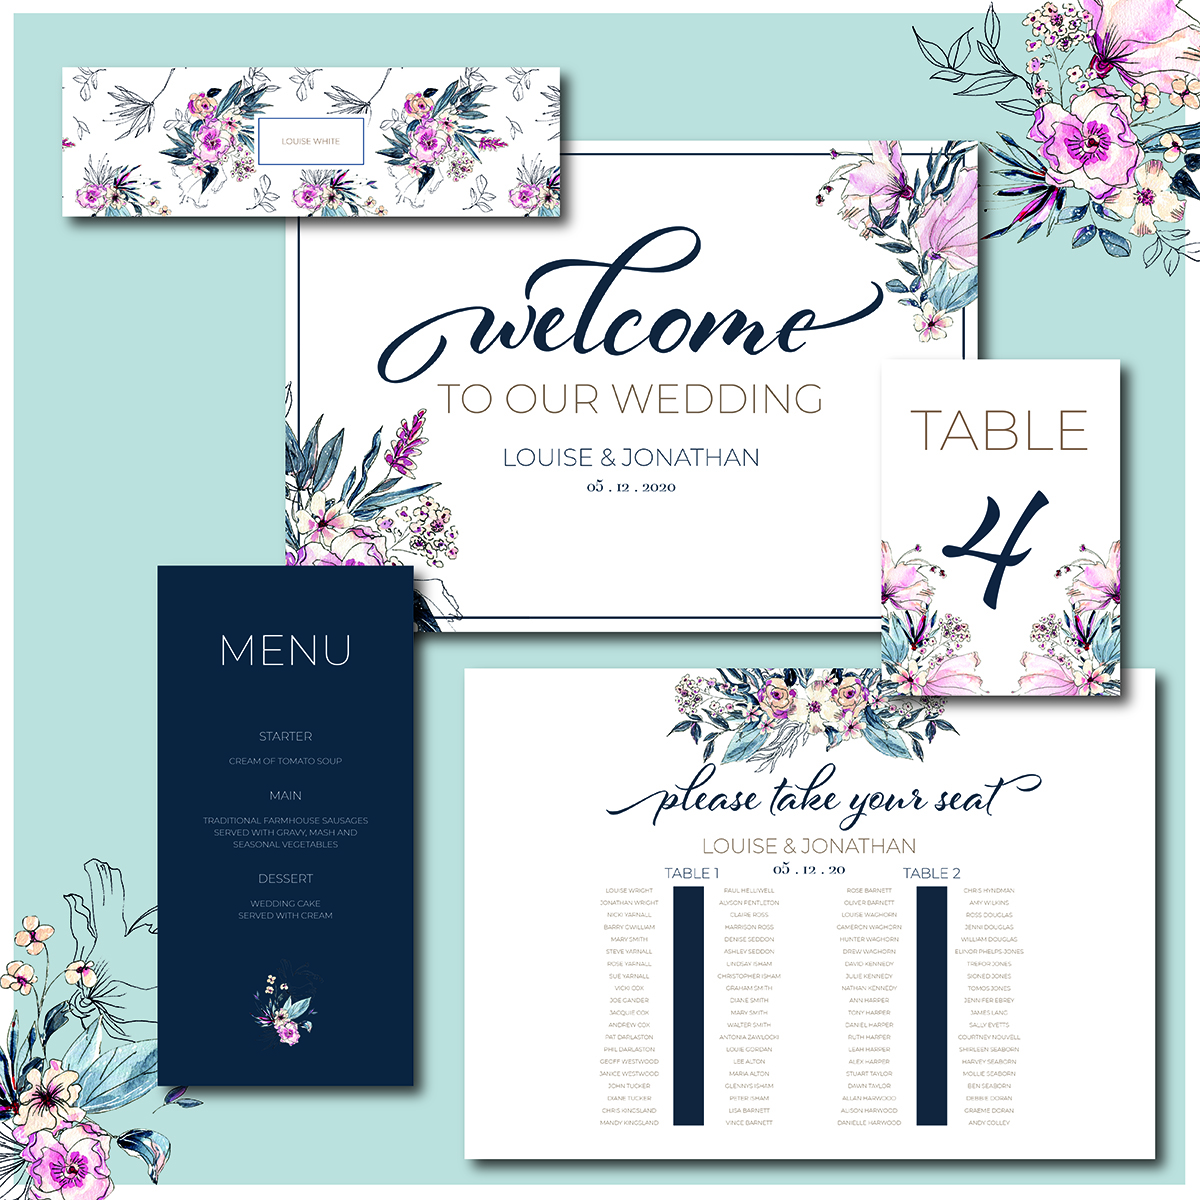 Wedding Stationery - Navy Sketch | Wedding Photographer and Wedding Stationery Designer in North Lincolnshire and UK gallery image 2